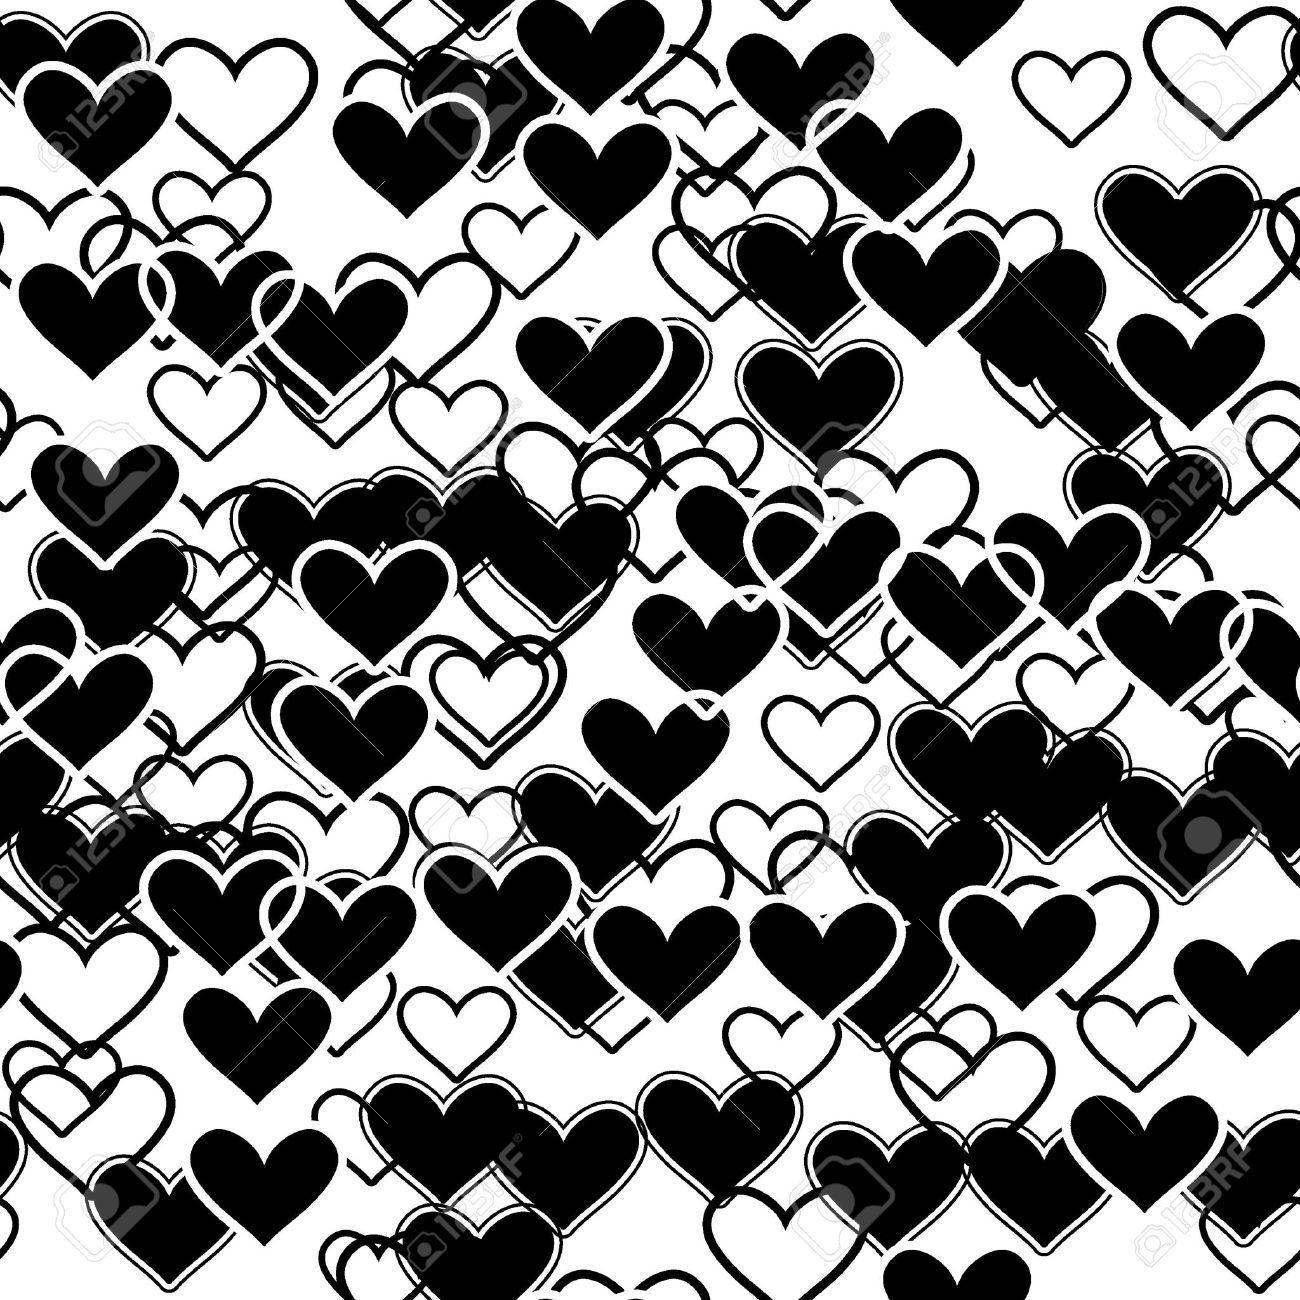 Black and White Heart Wallpapers - Top Free Black and White Heart